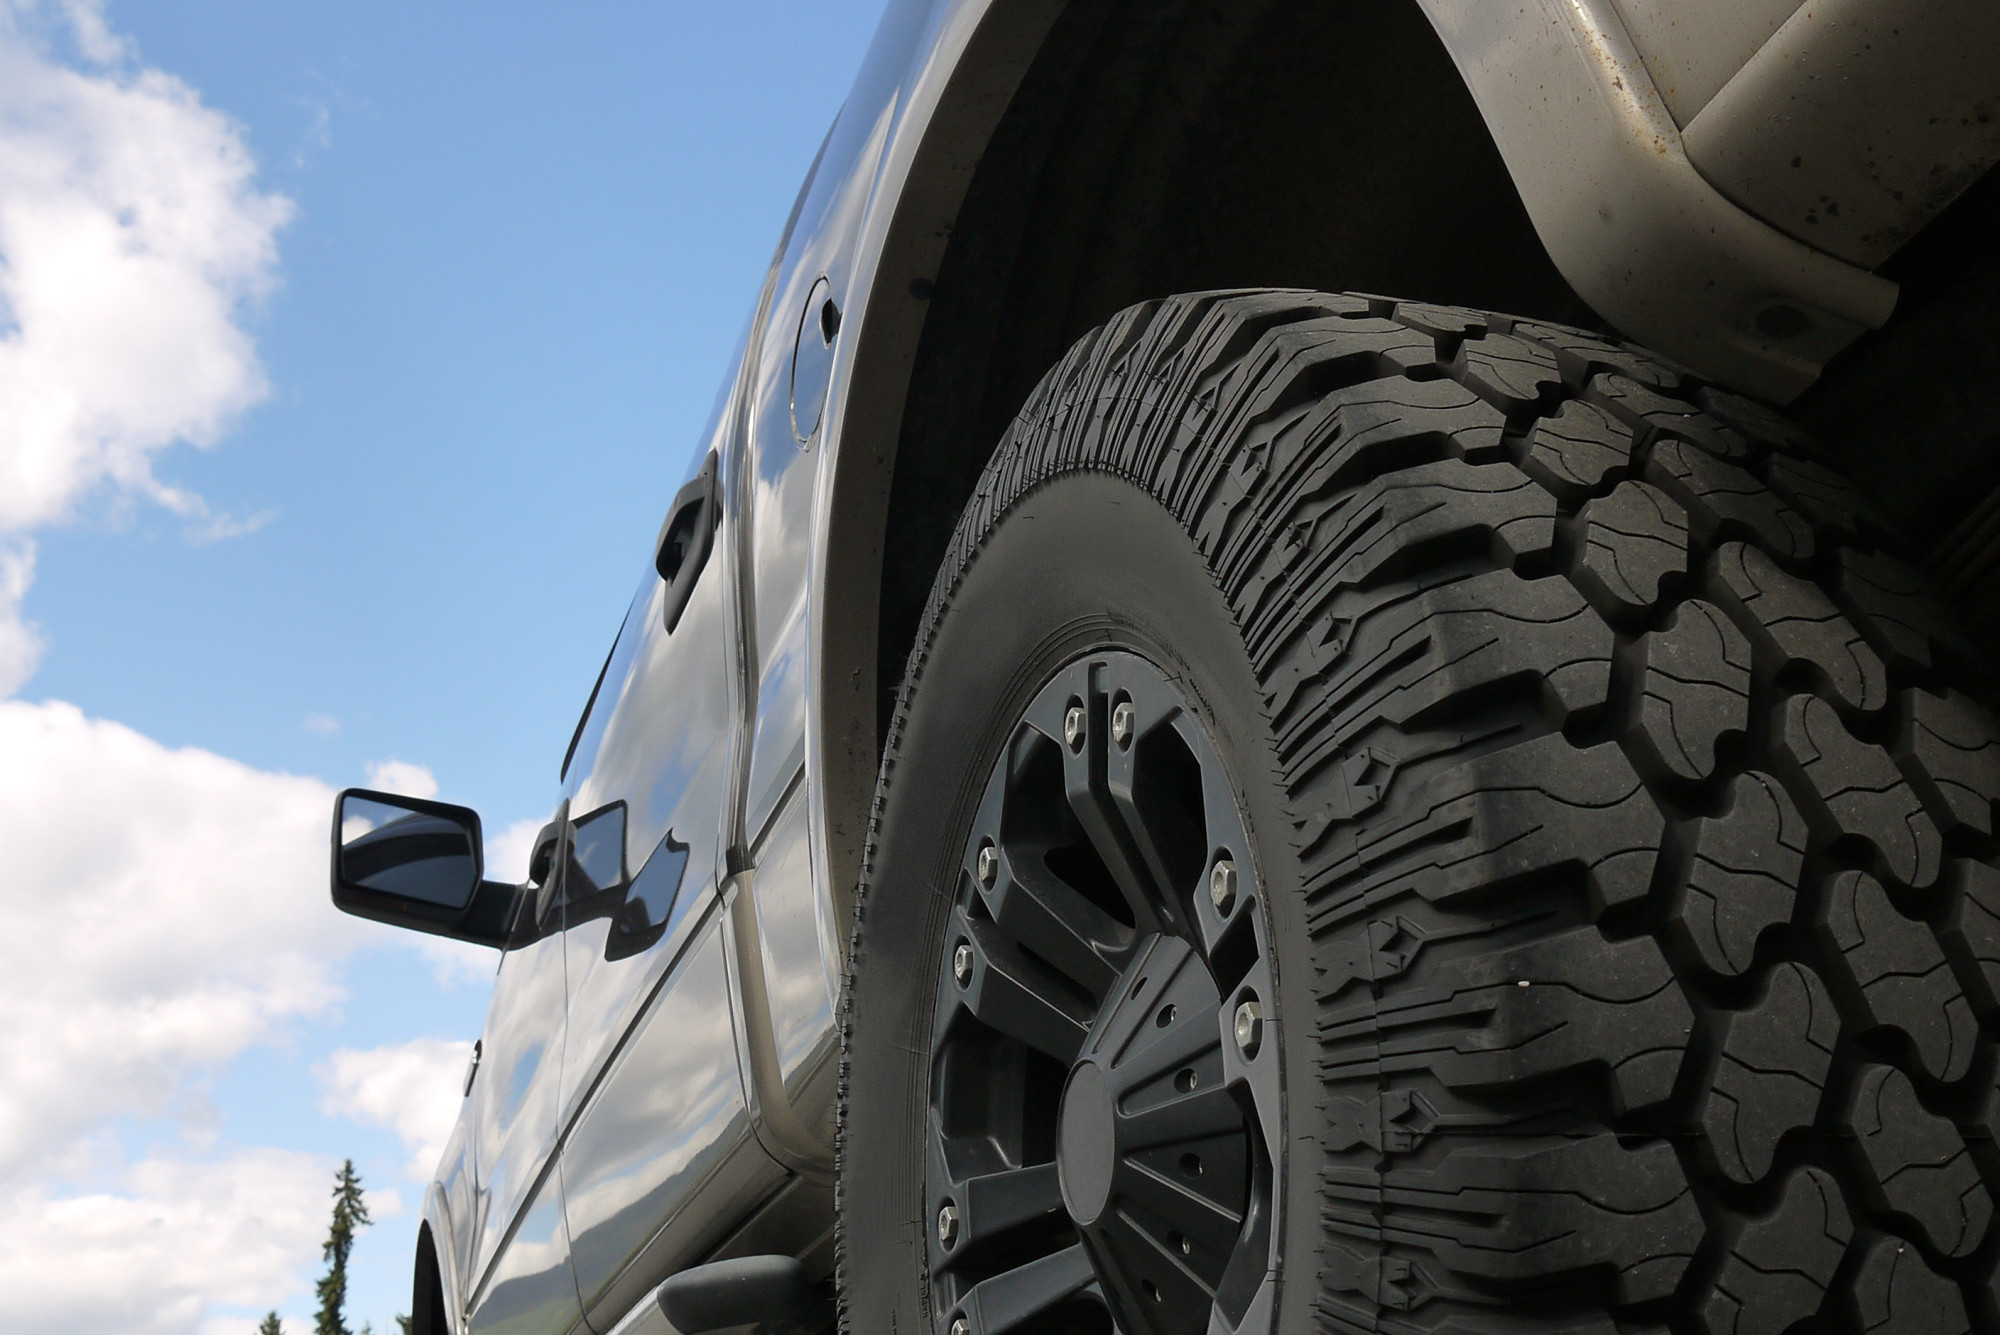 6 Factors to Consider When Buying a Used Ford Raptor